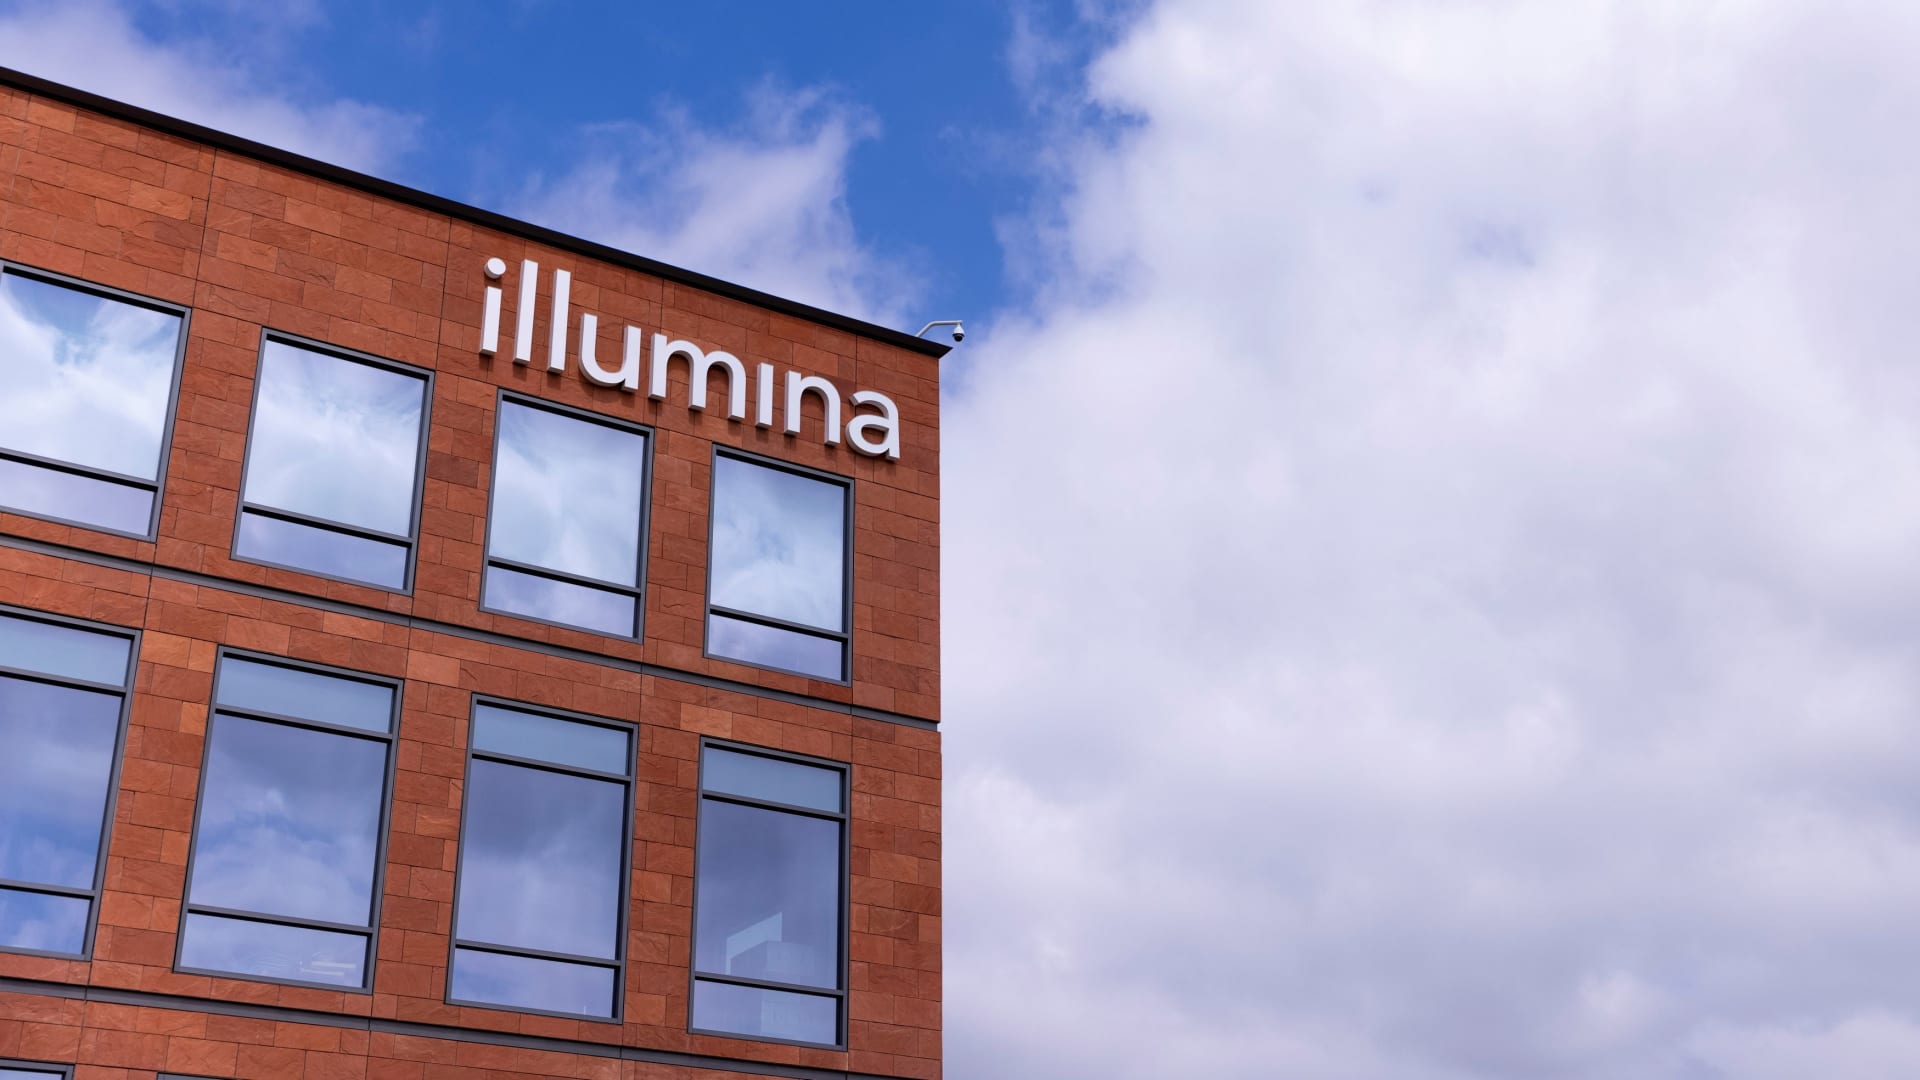 Illumina names new CEO months after Icahn proxy fight over Grail deal